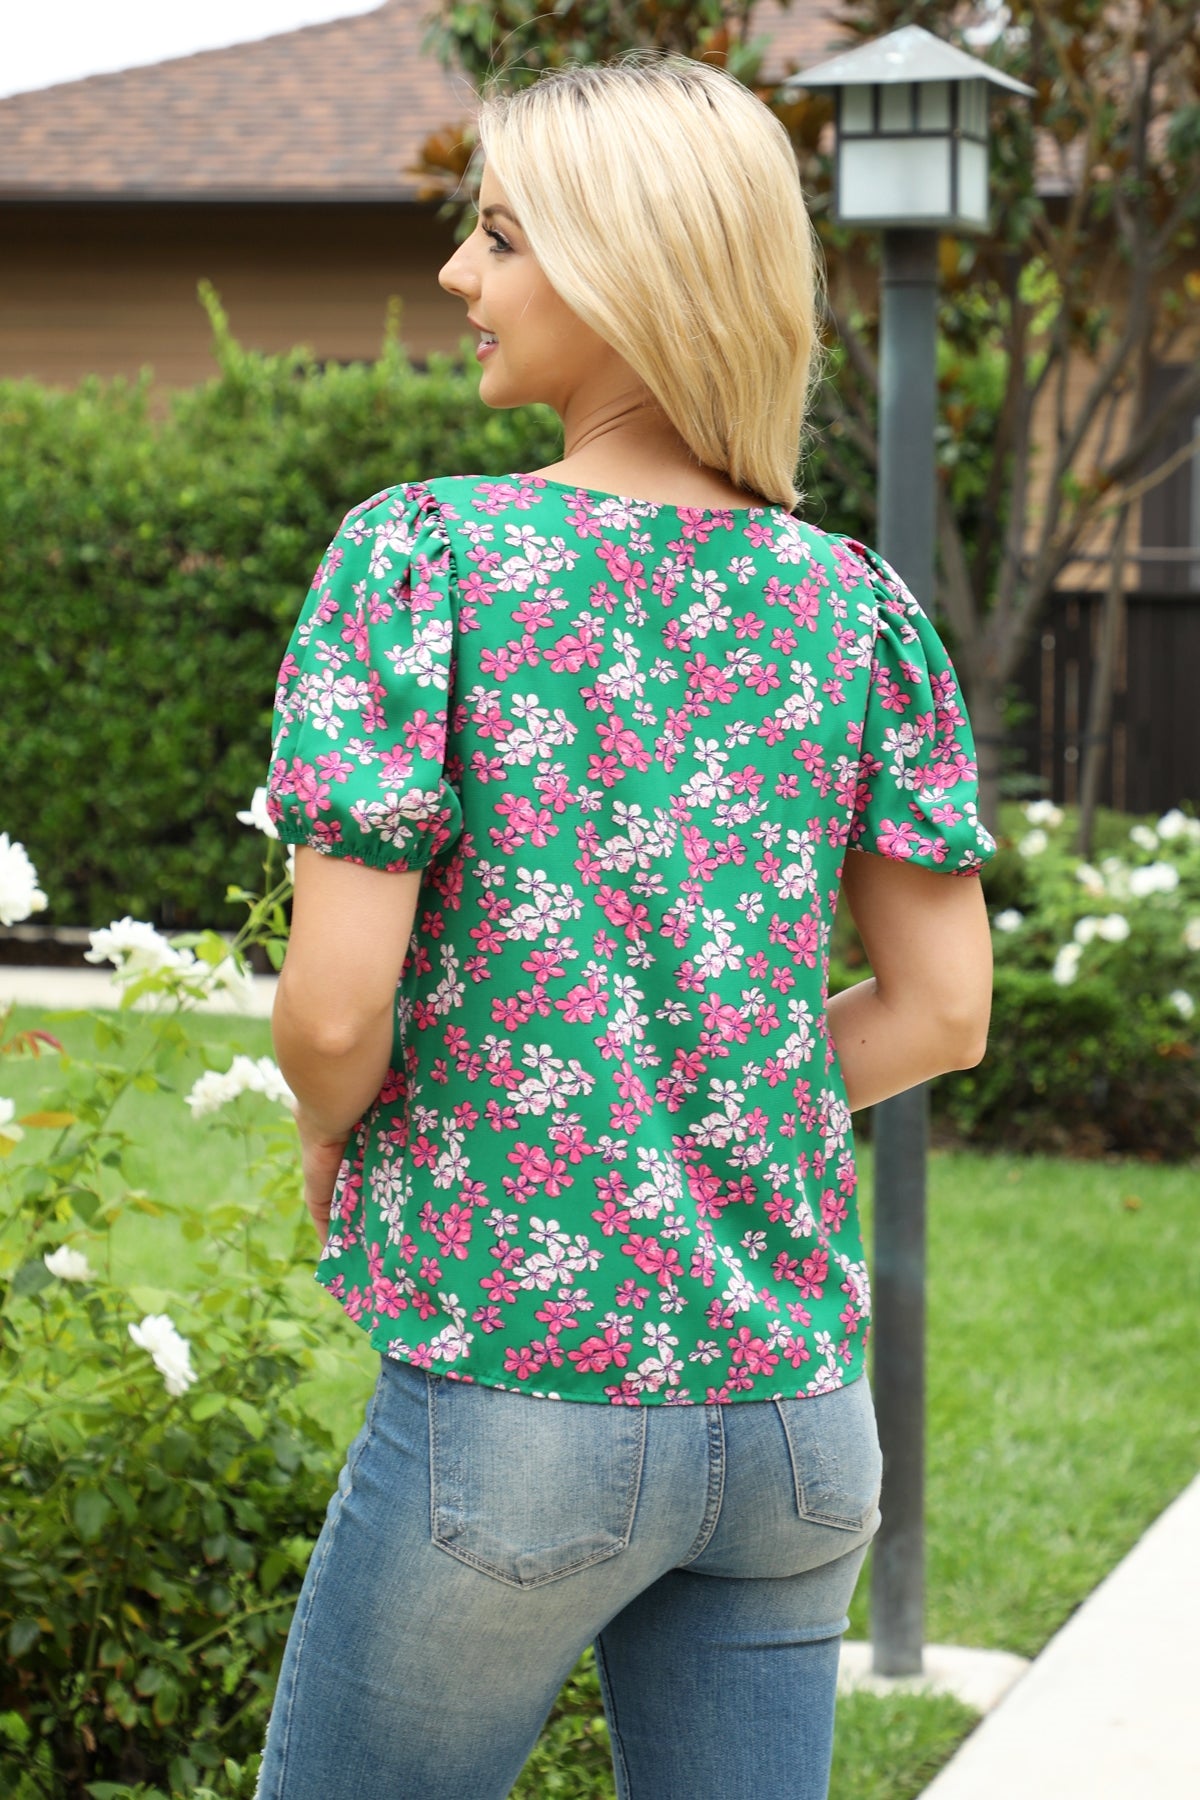 GREEN PINK FLORAL SQUARE NECKLINE TOP 2-2-2 (NOW $3.50 ONLY!)